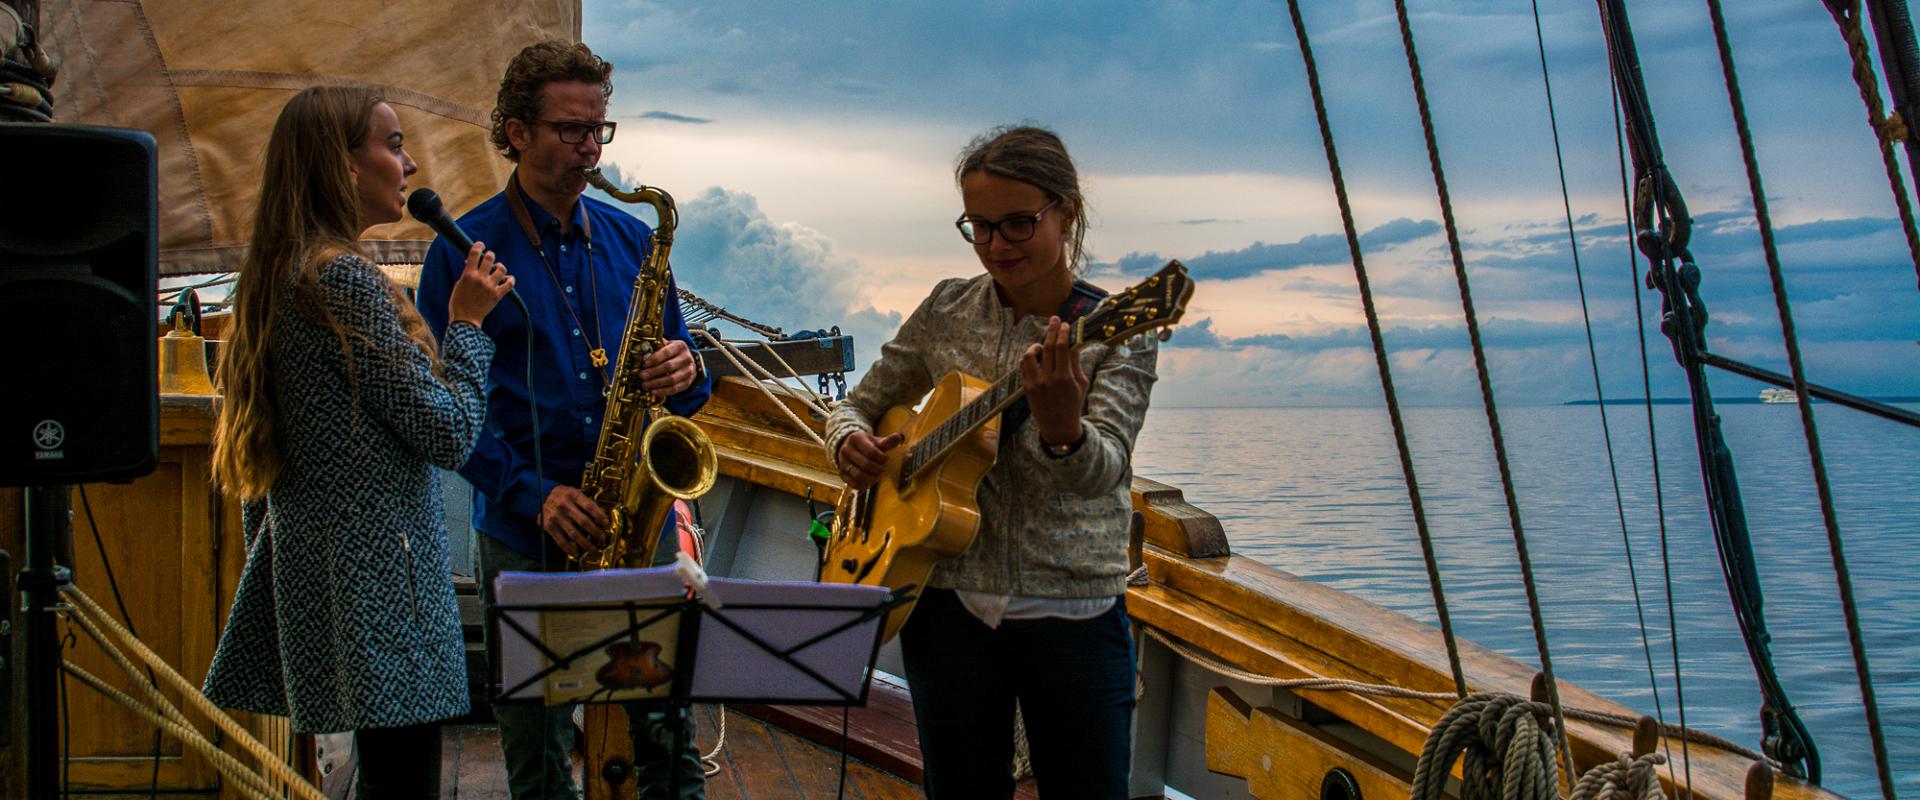 Sunset cruises and concerts at sea on the sailing ship Hoppet